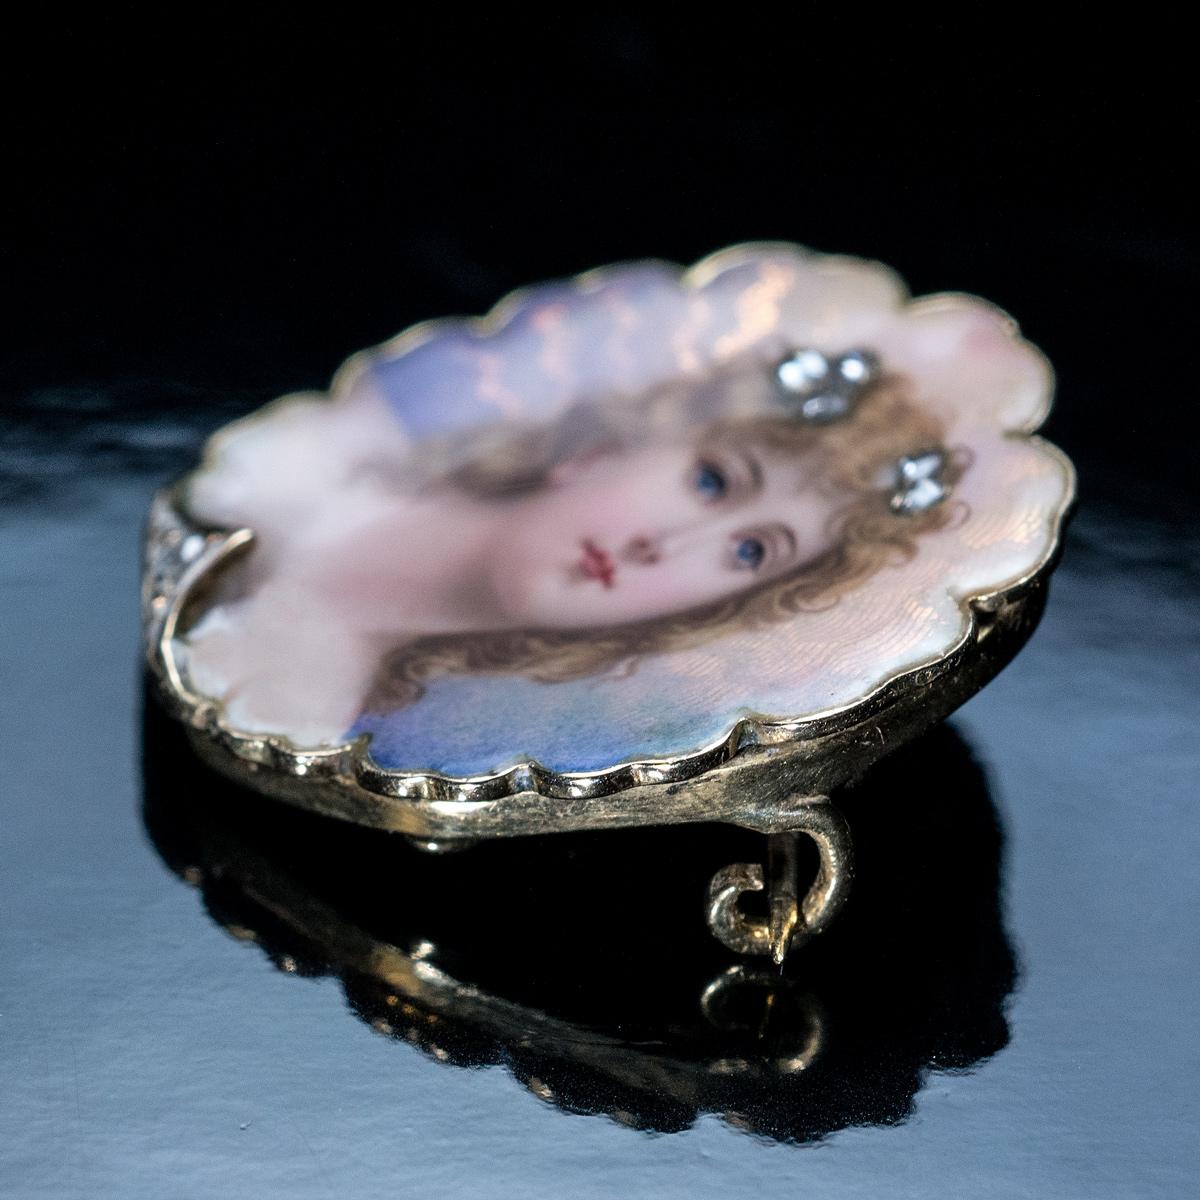 Circa 1900

An antique 18K gold shell-shaped brooch is finely enameled with a beauty of le Belle Epoque on a pinkish-purple guilloche background. The portrait is accented by six tiny rose cut diamonds.

The design is influenced by the Art Nouveau